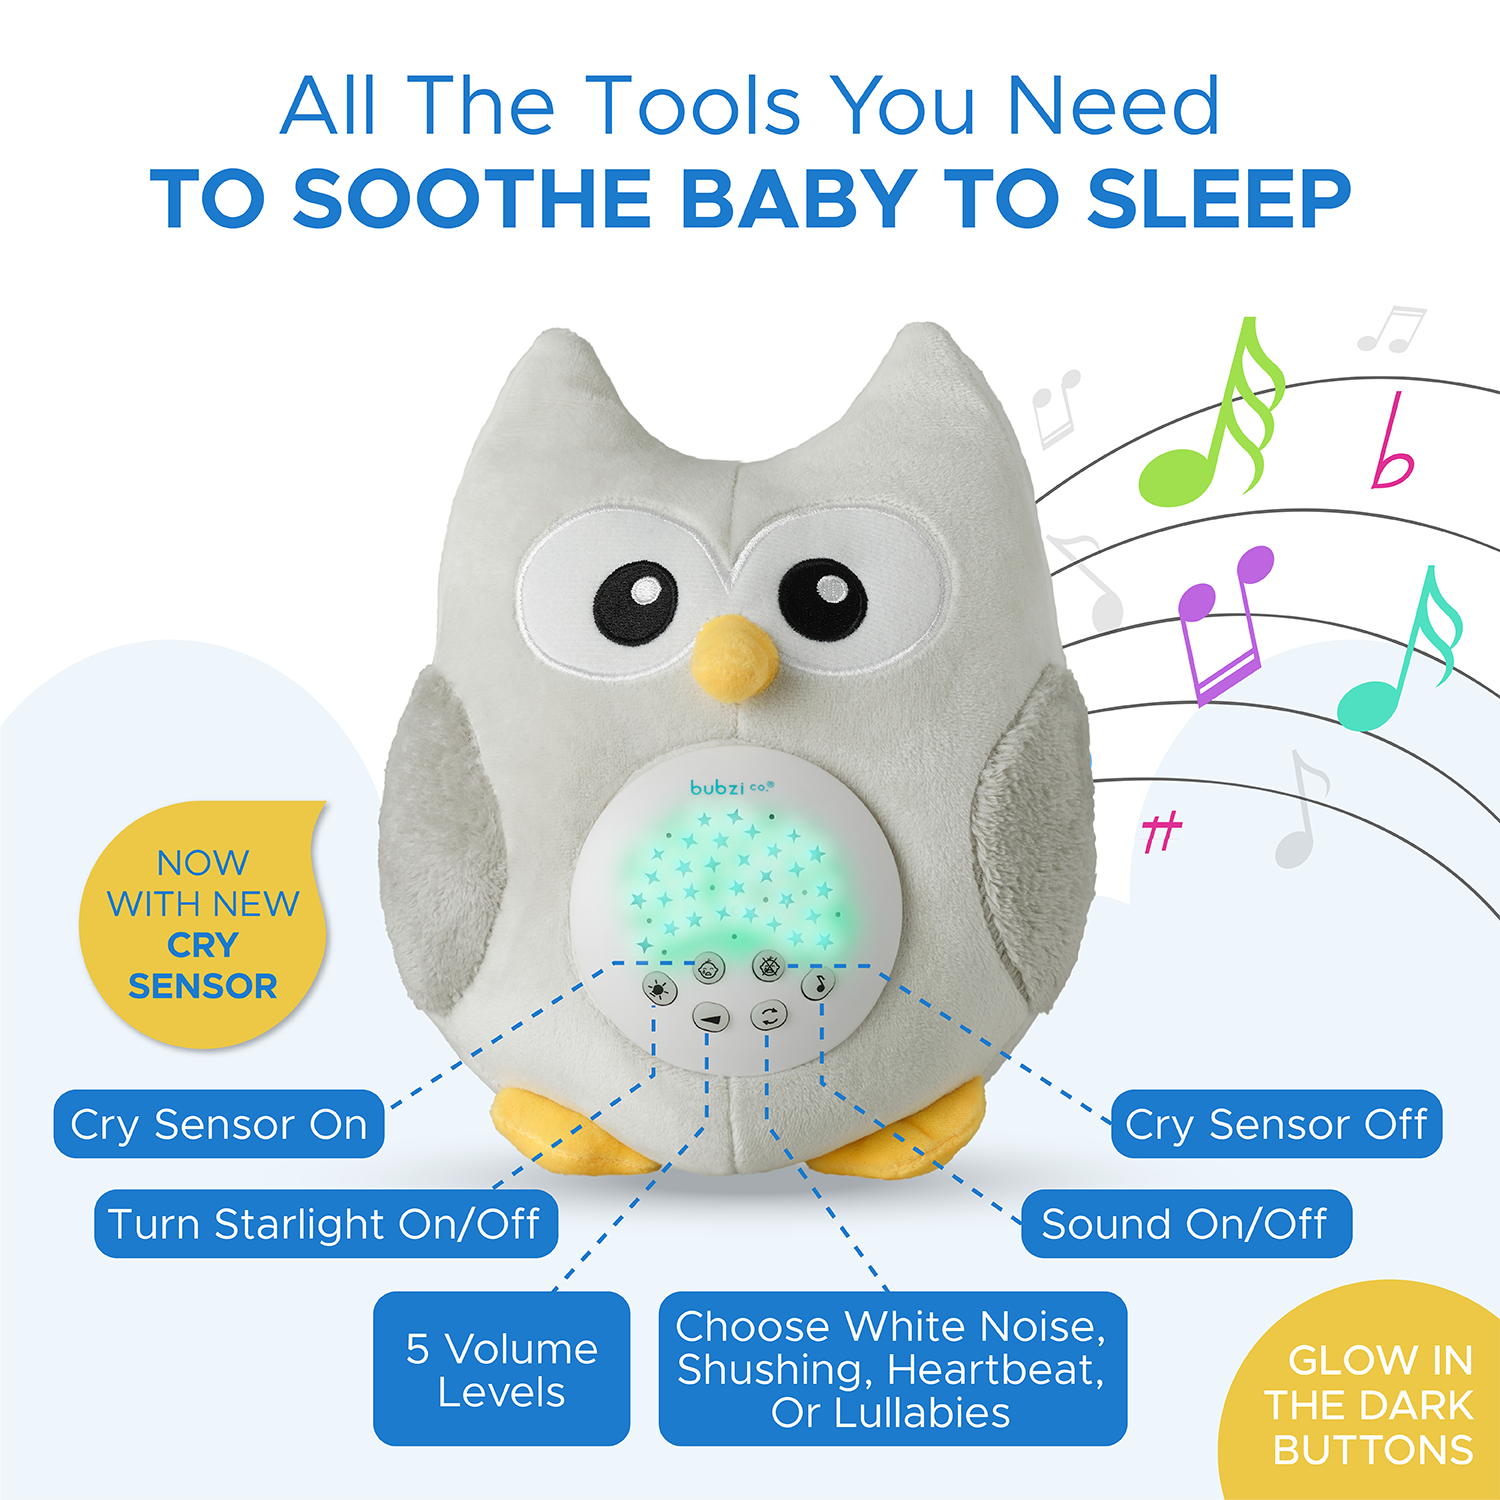 Baby Bath Pillow – Soothing Company